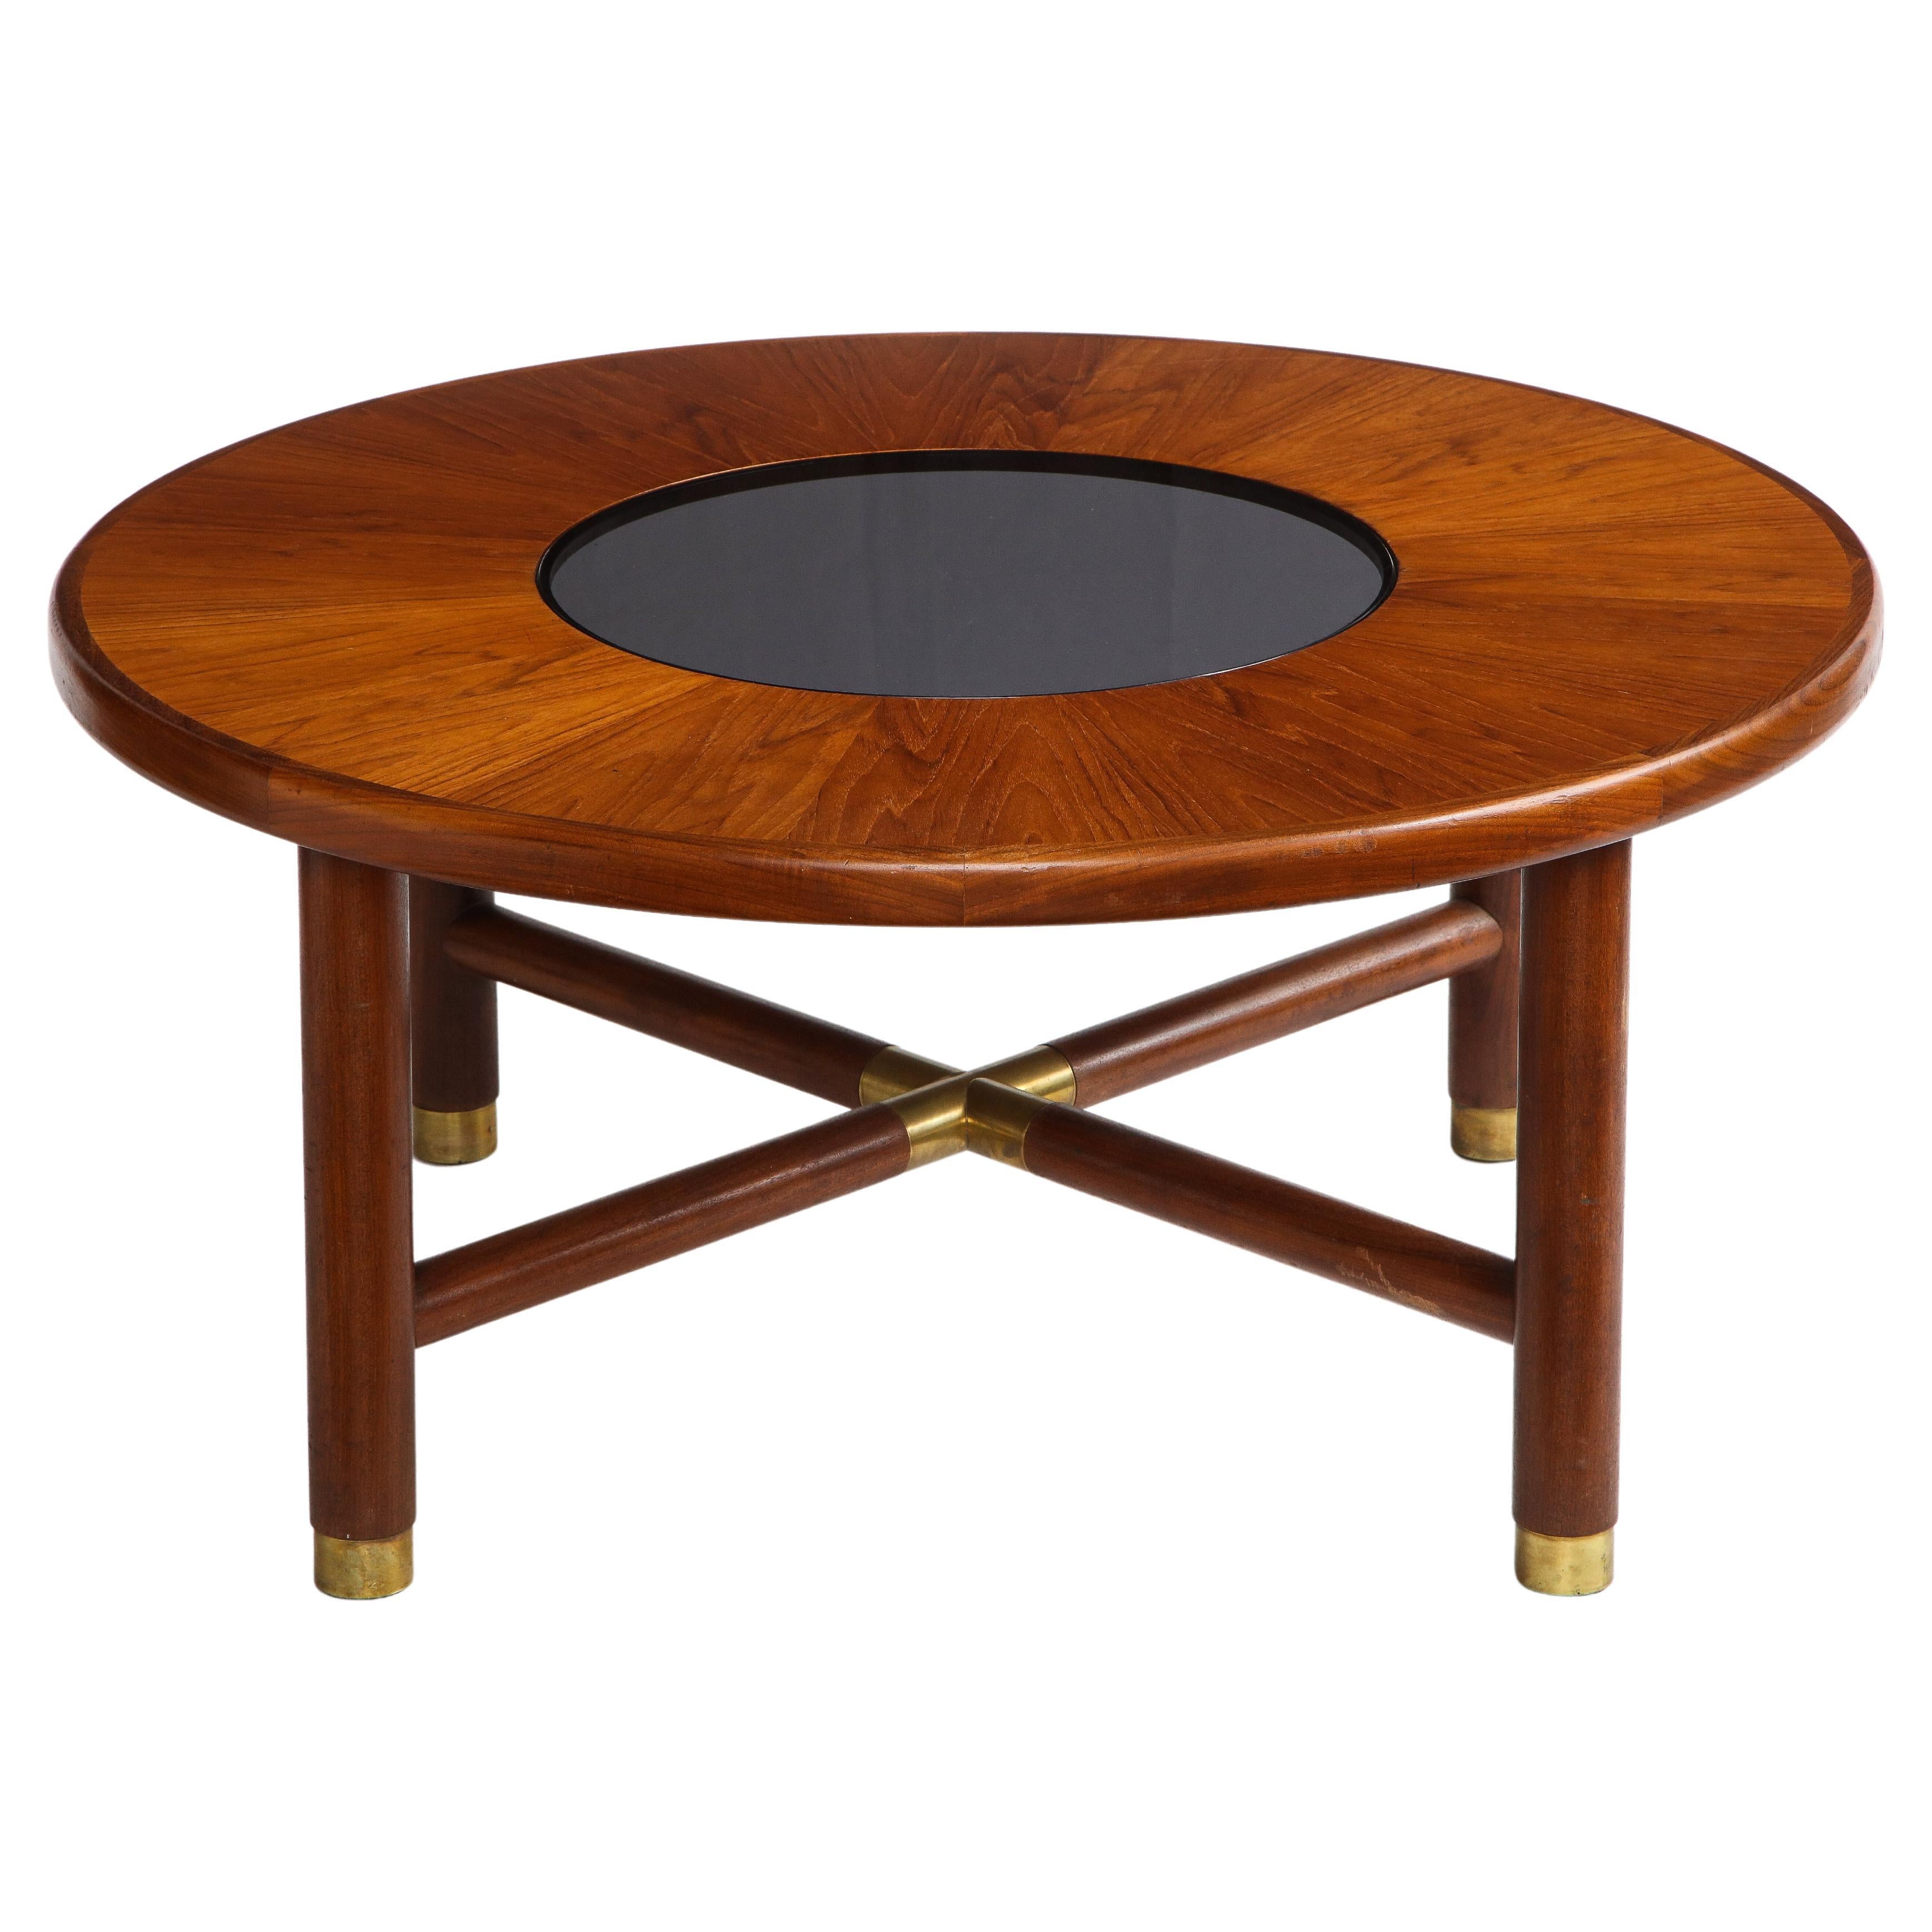 Midcentury Round Teak and Smoked Glass Coffee Table by G-Plan, U.K. 1960s For Sale